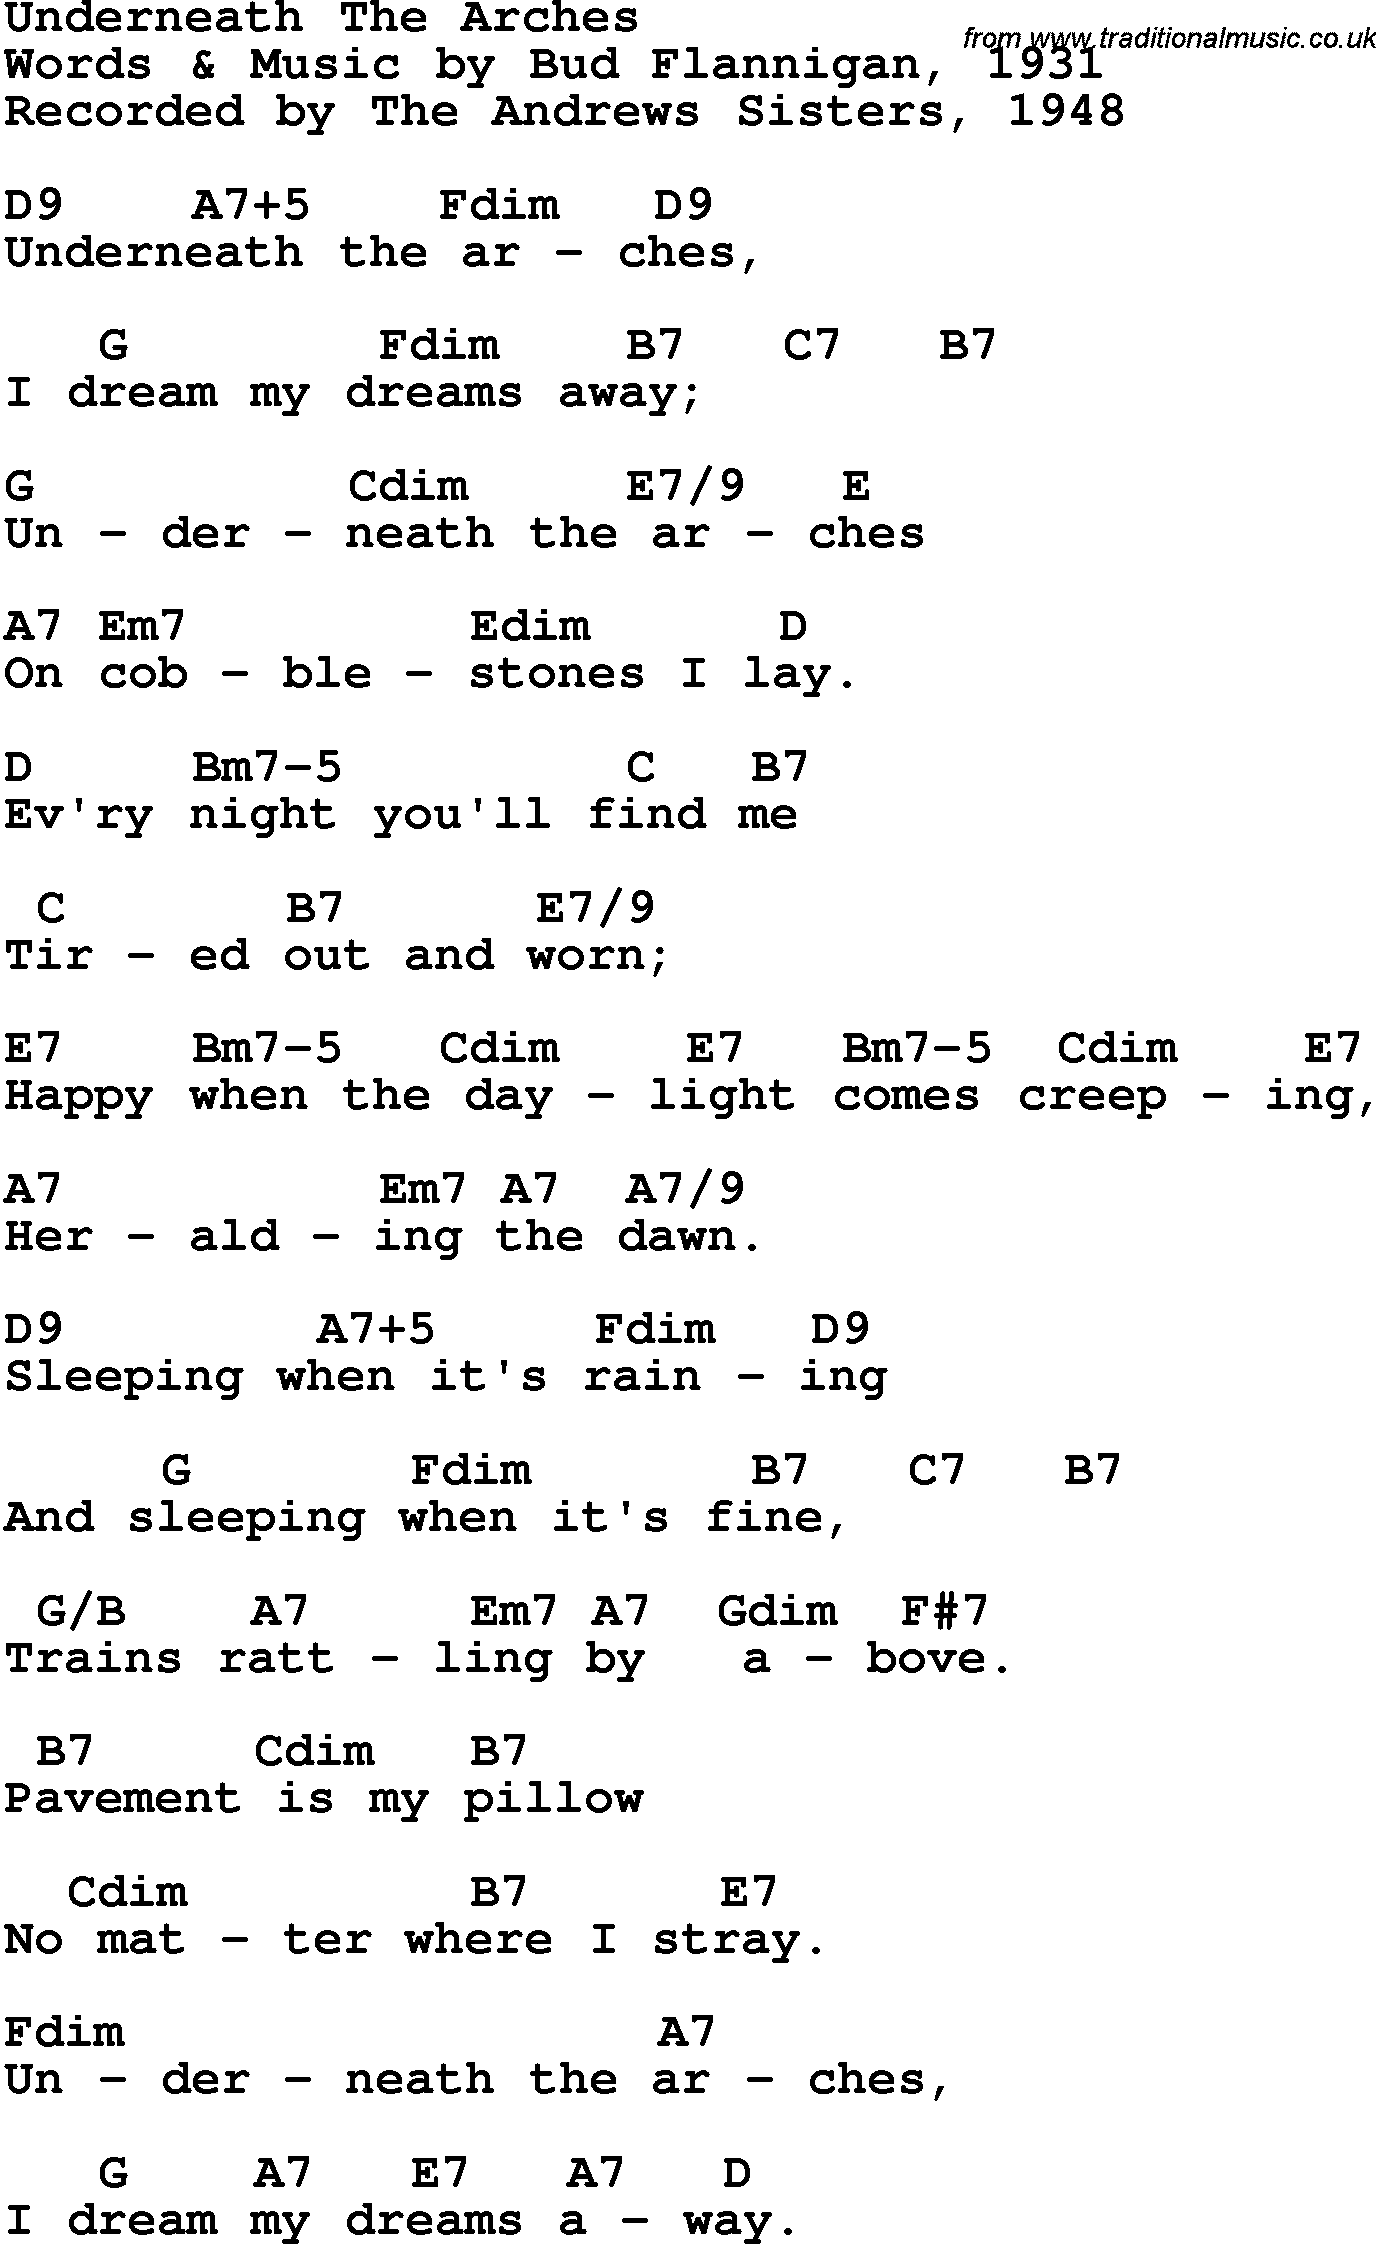 Song Lyrics with guitar chords for Underneath The Arches - The Andrews Sisters, 1948